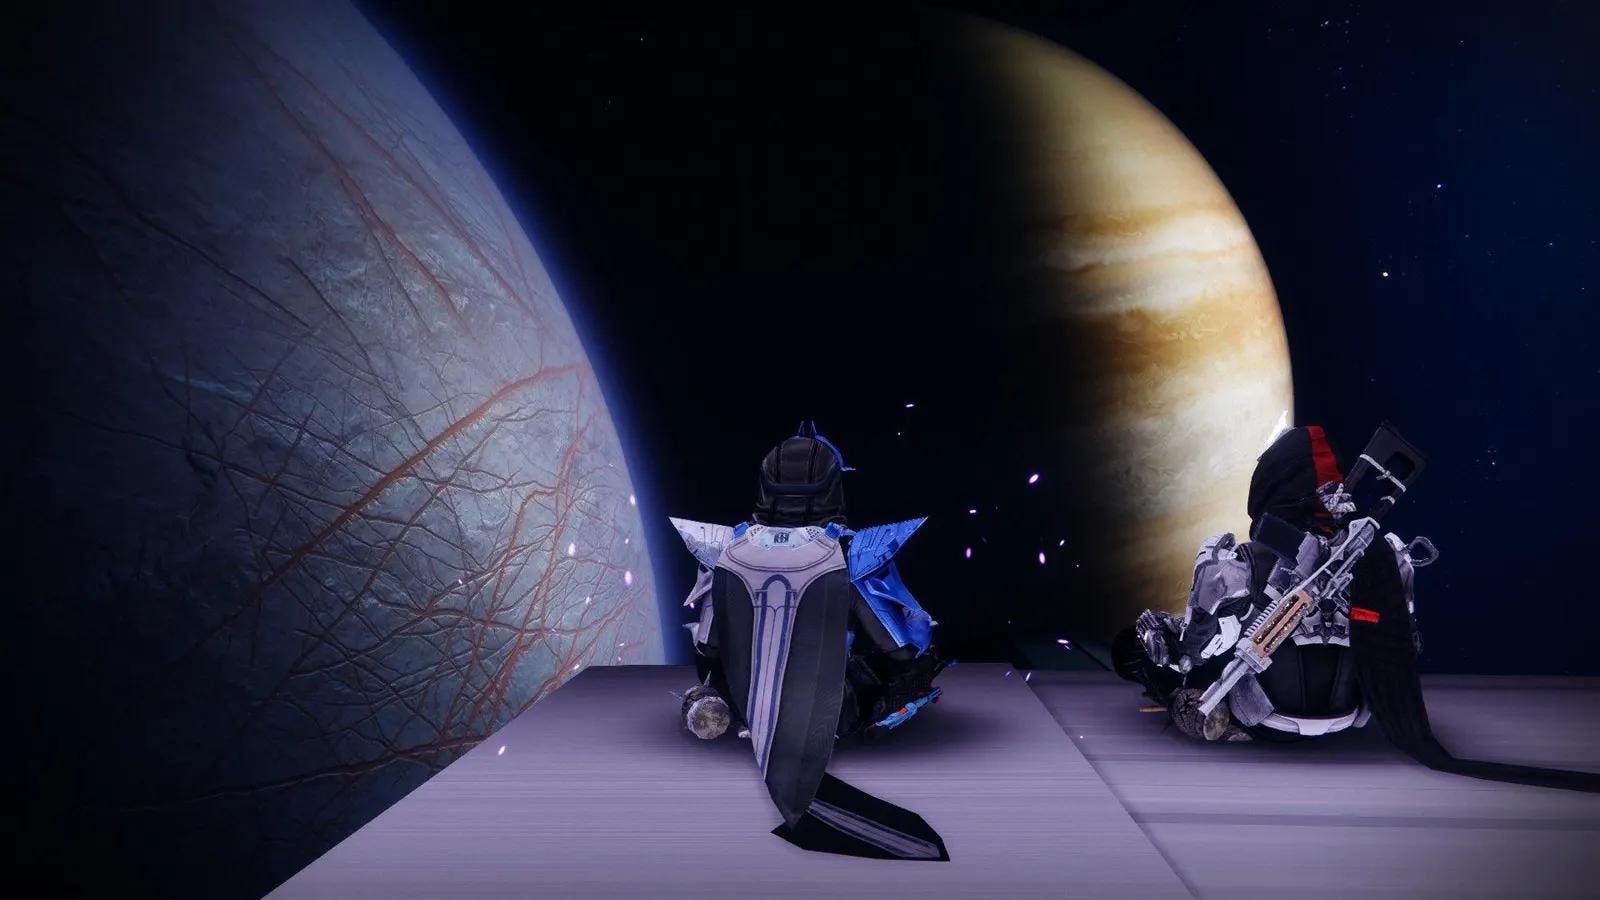 ‘Destiny 2’ Players Stunned Bungie Has Laid Off Michael Salvatori, Its Famed Composer